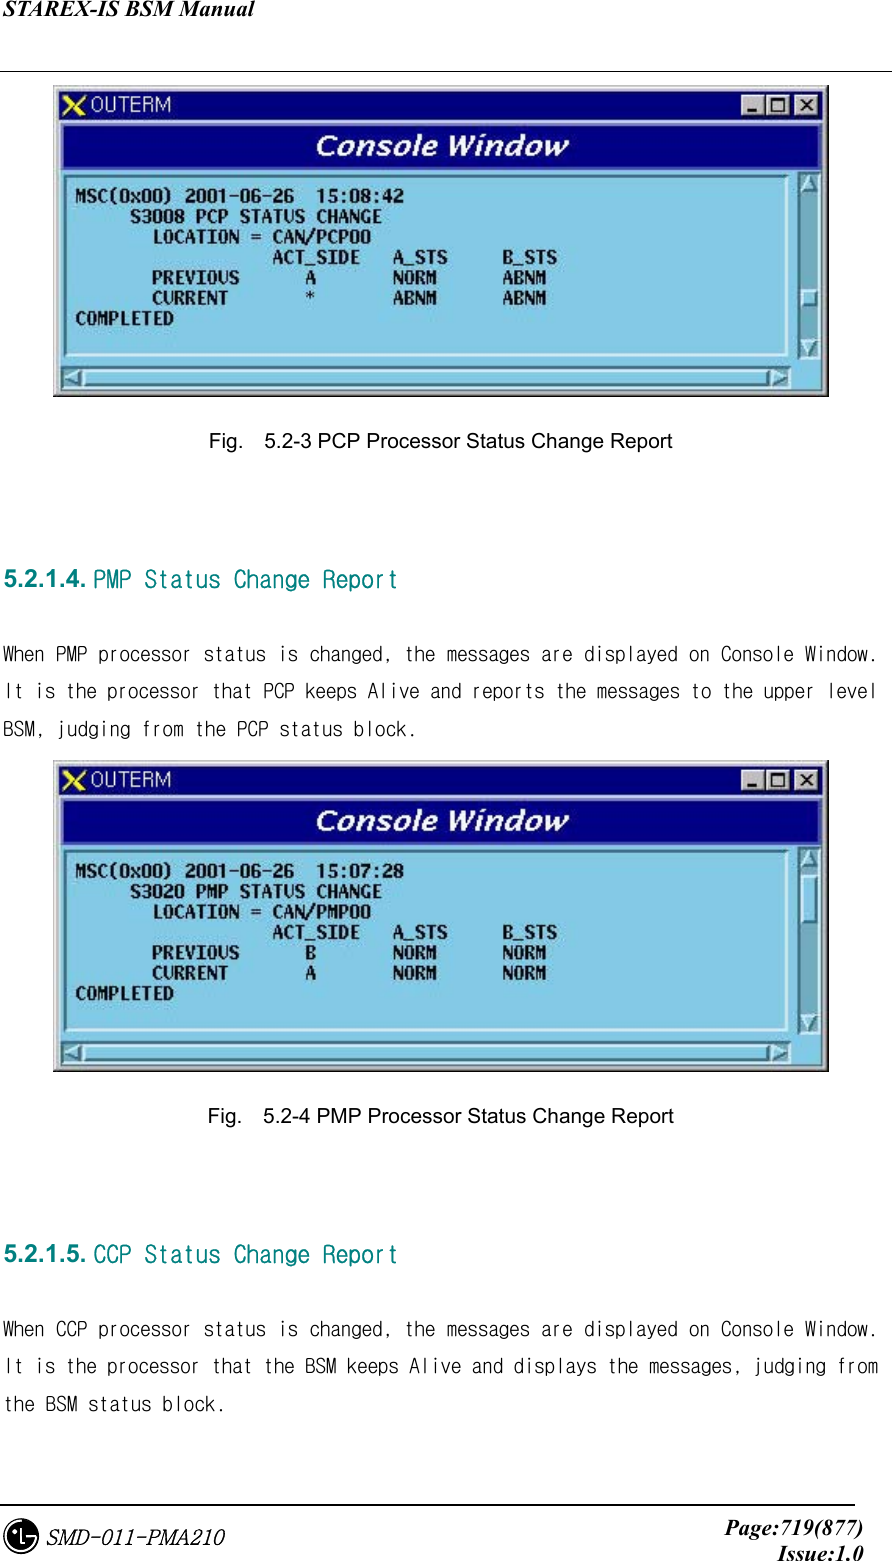 STAREX-IS BSM Manual     Page:719(877)Issue:1.0SMD-011-PMA210  Fig.    5.2-3 PCP Processor Status Change Report   5.2.1.4. PMP Status Change Report  When PMP processor status is changed, the messages are displayed on Console Window. It is the processor that PCP keeps Alive and reports the messages to the upper level BSM, judging from the PCP status block.  Fig.    5.2-4 PMP Processor Status Change Report   5.2.1.5. CCP Status Change Report  When CCP processor status is changed, the messages are displayed on Console Window. It is the processor that the BSM keeps Alive and displays the messages, judging from the BSM status block. 